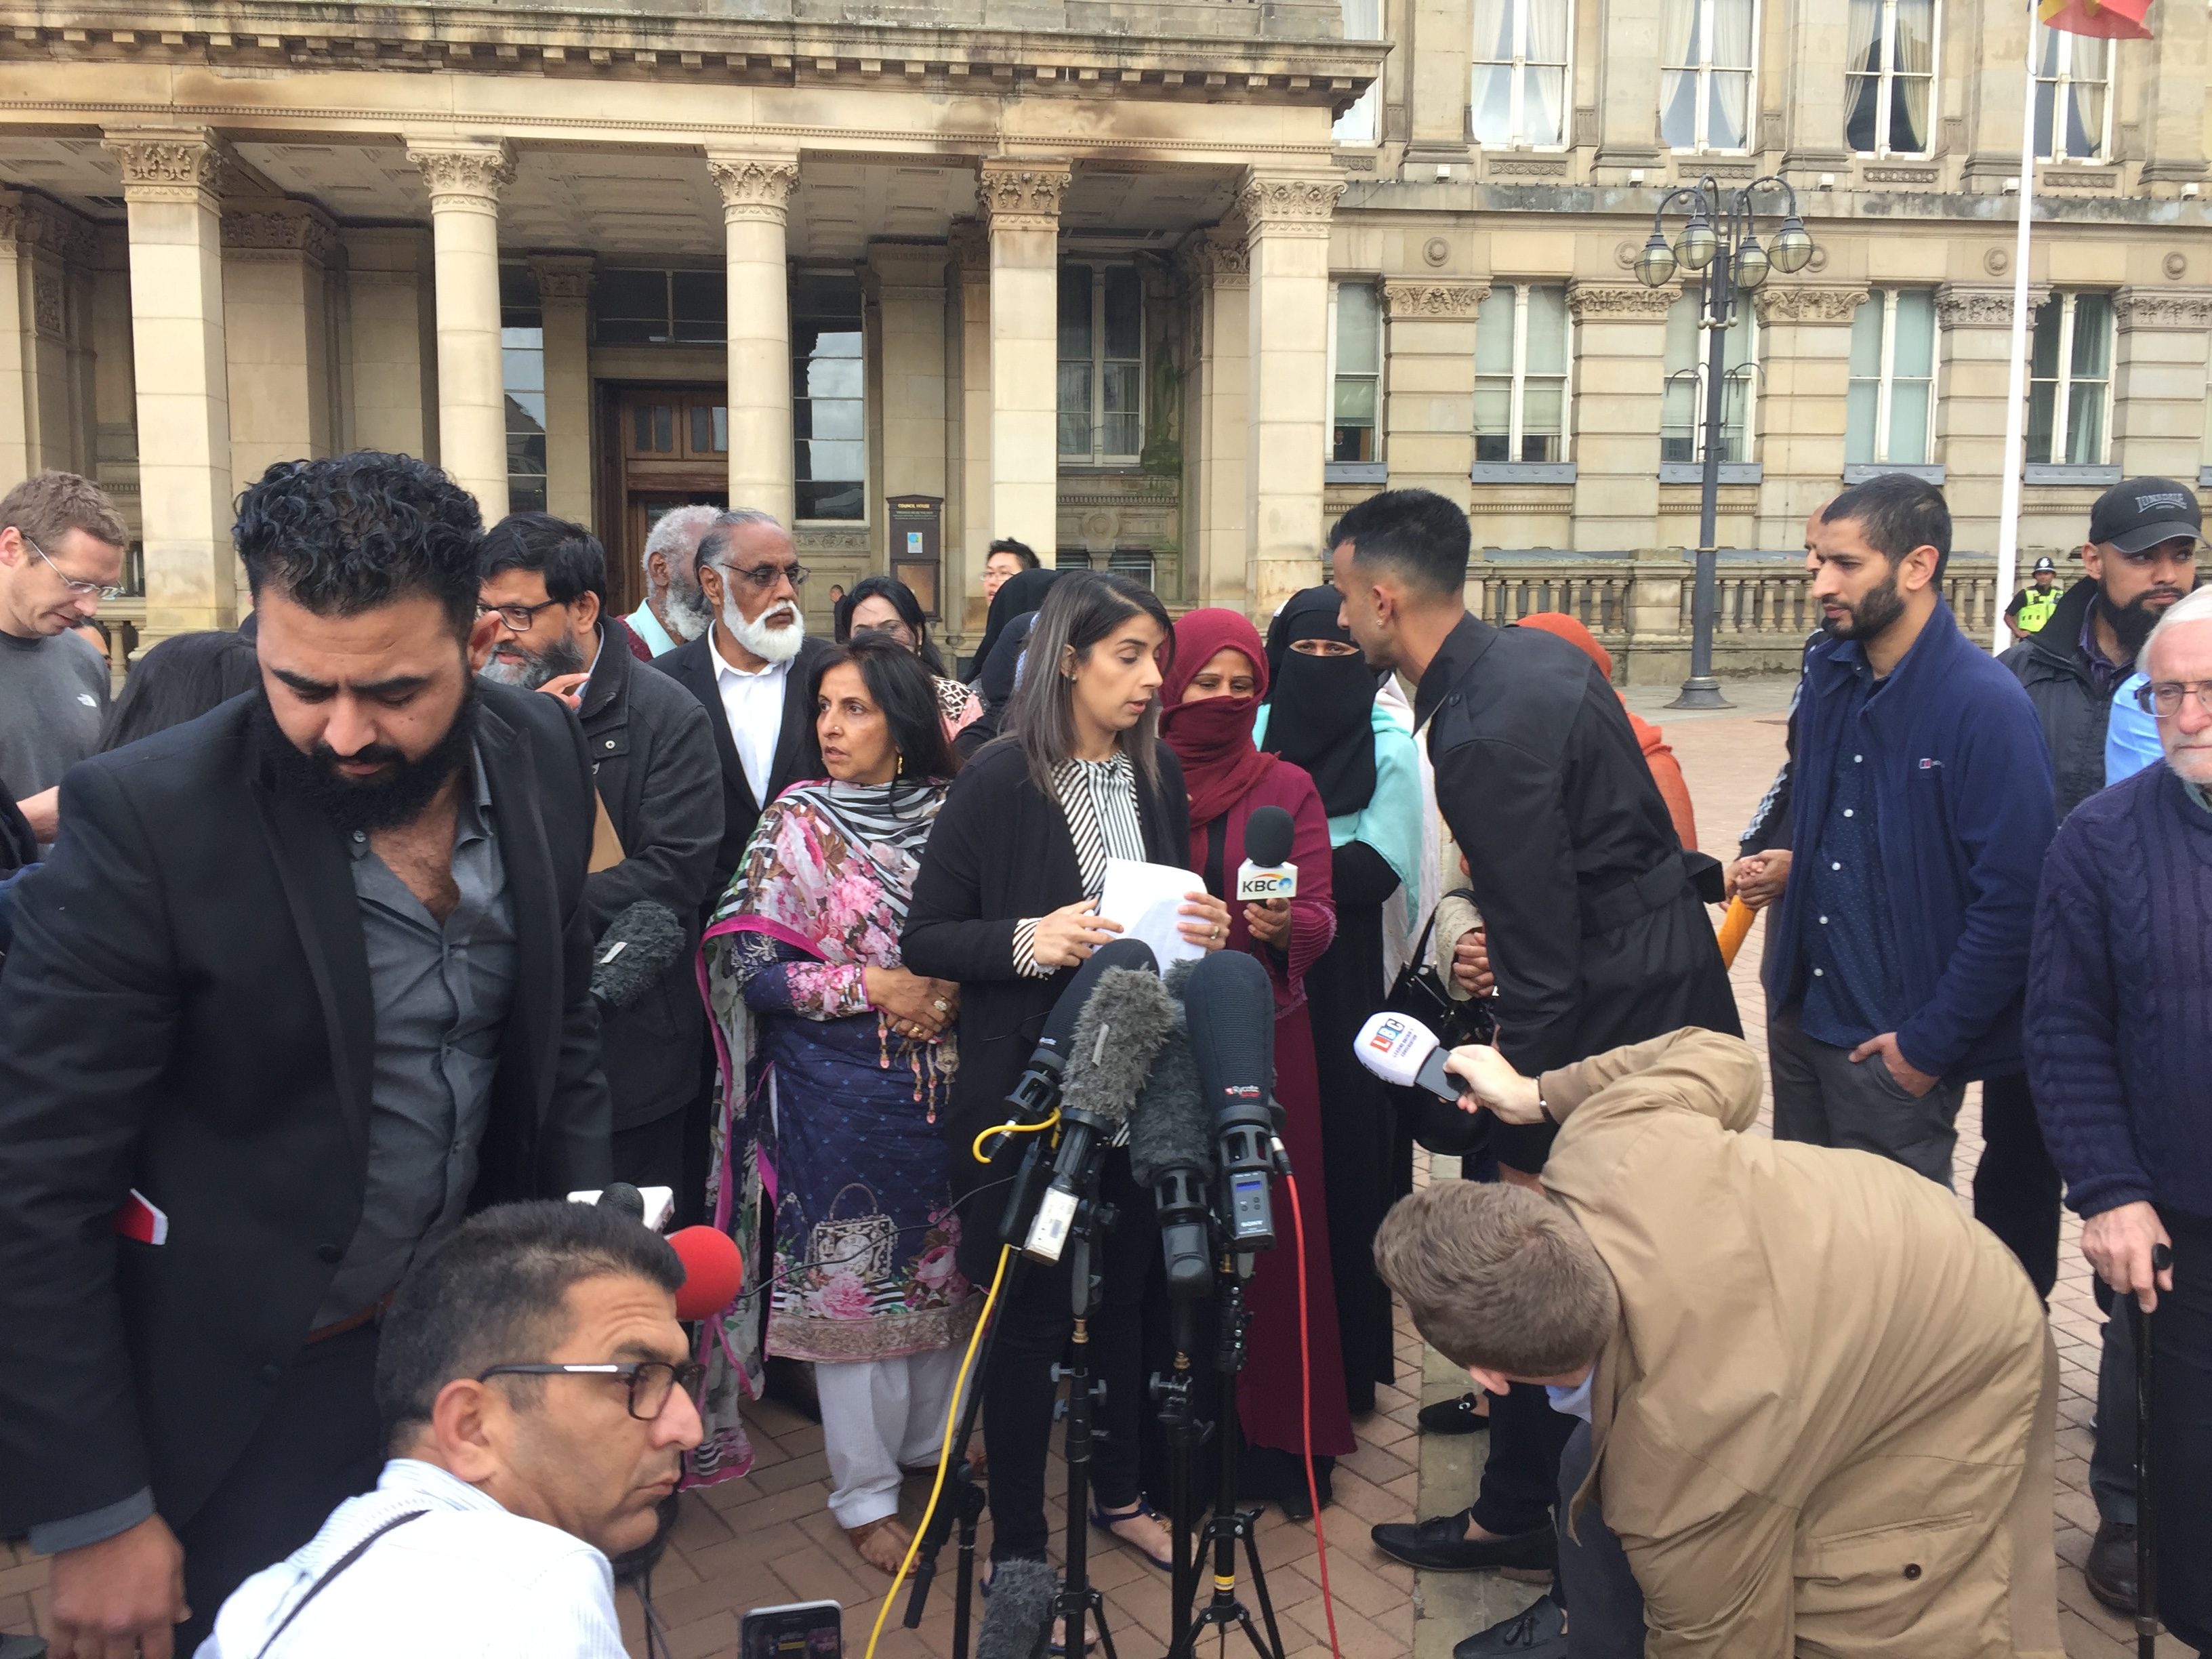 Protesters who have been demomstrating against relationship education materials being used at Anderton Park Primary School, hold a press conference in Birmingham city centre